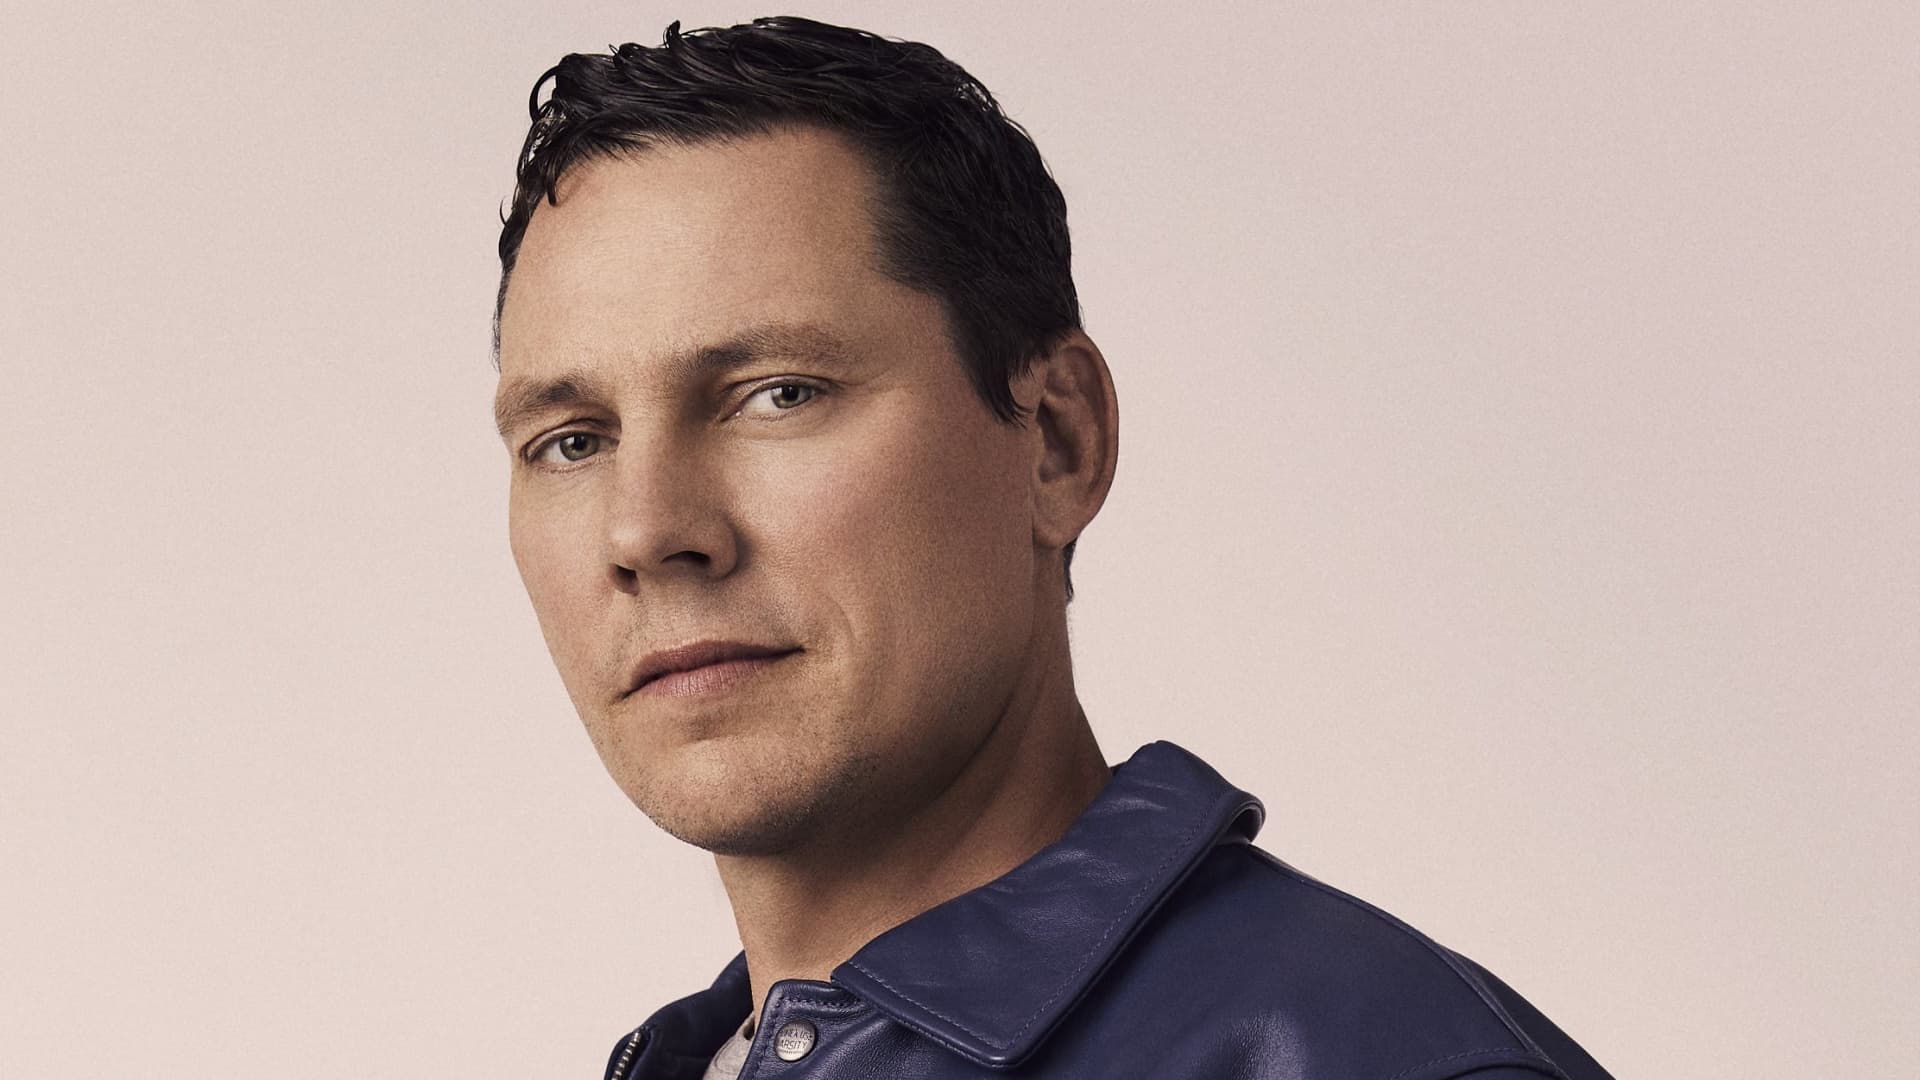 Tiësto sets release date for new album ‘Drive’